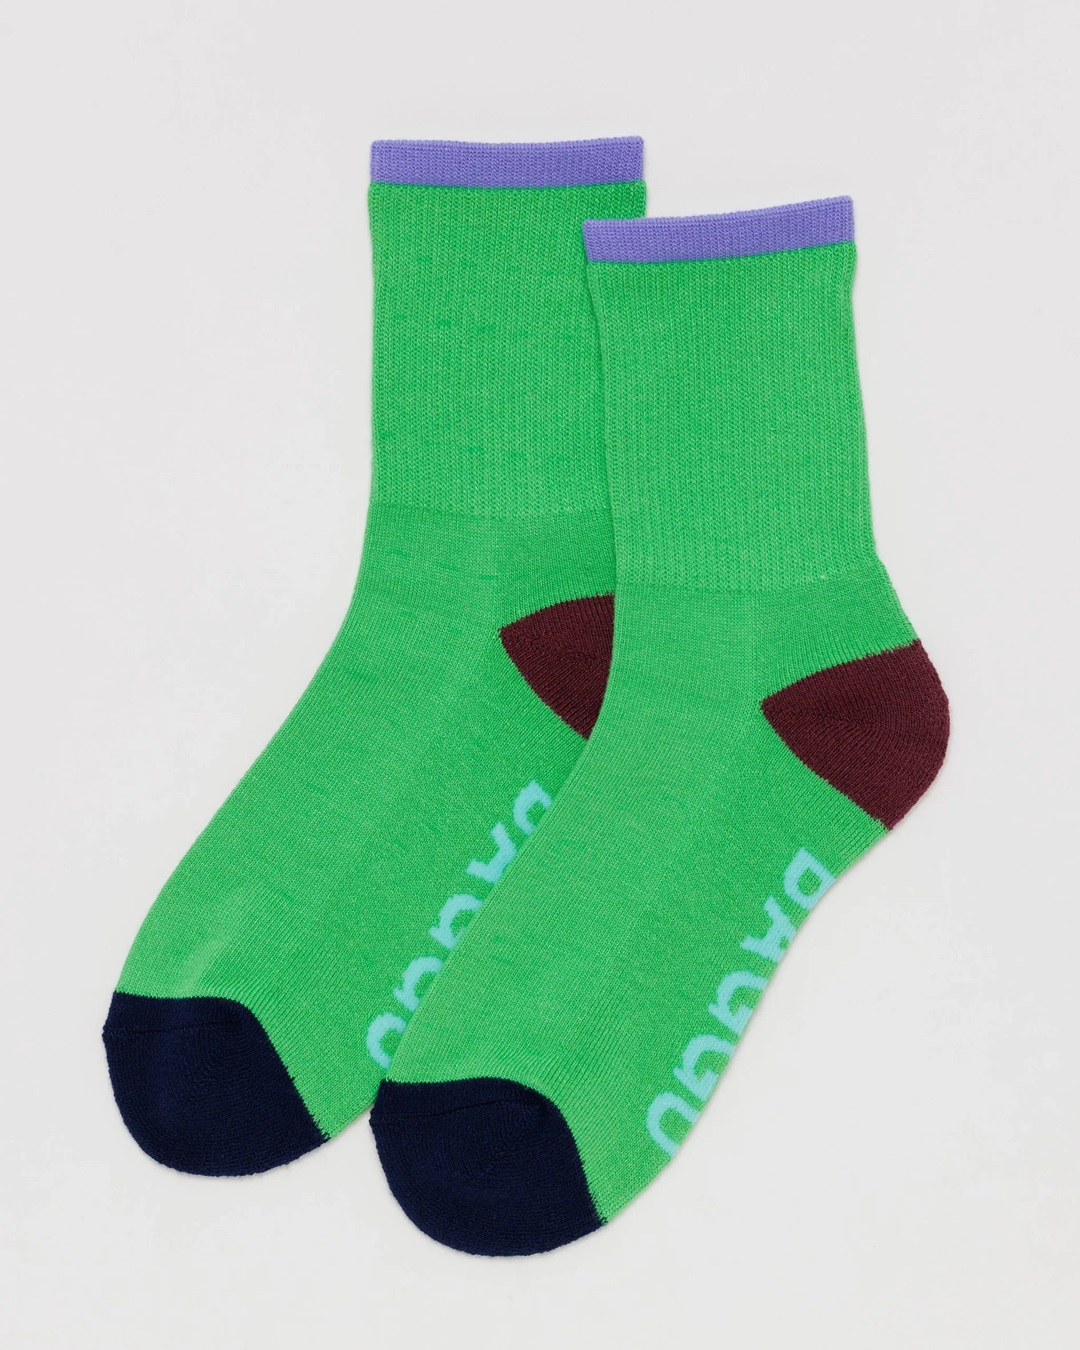 Aleo green pair of socks with black coloured toes and brown heels